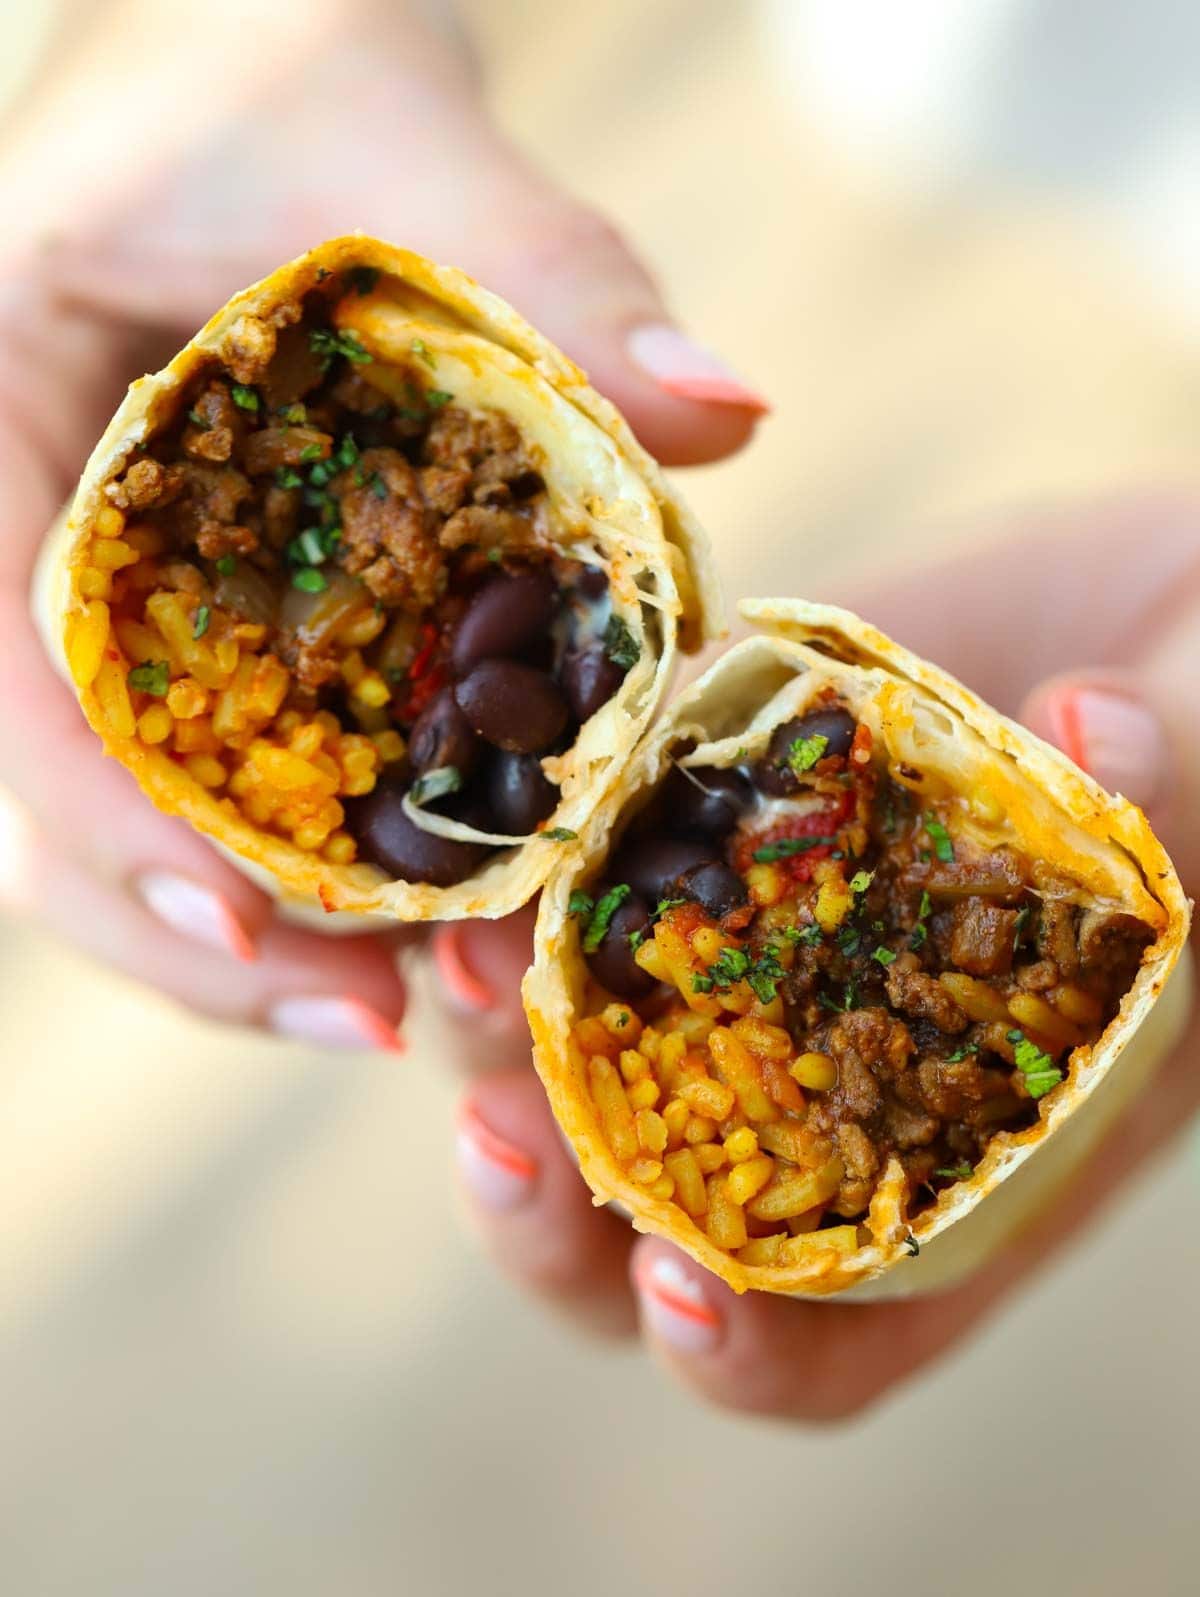 Two hands holding separate halves of a Beef Burritos, filled with mince, rice, beans and cheese.